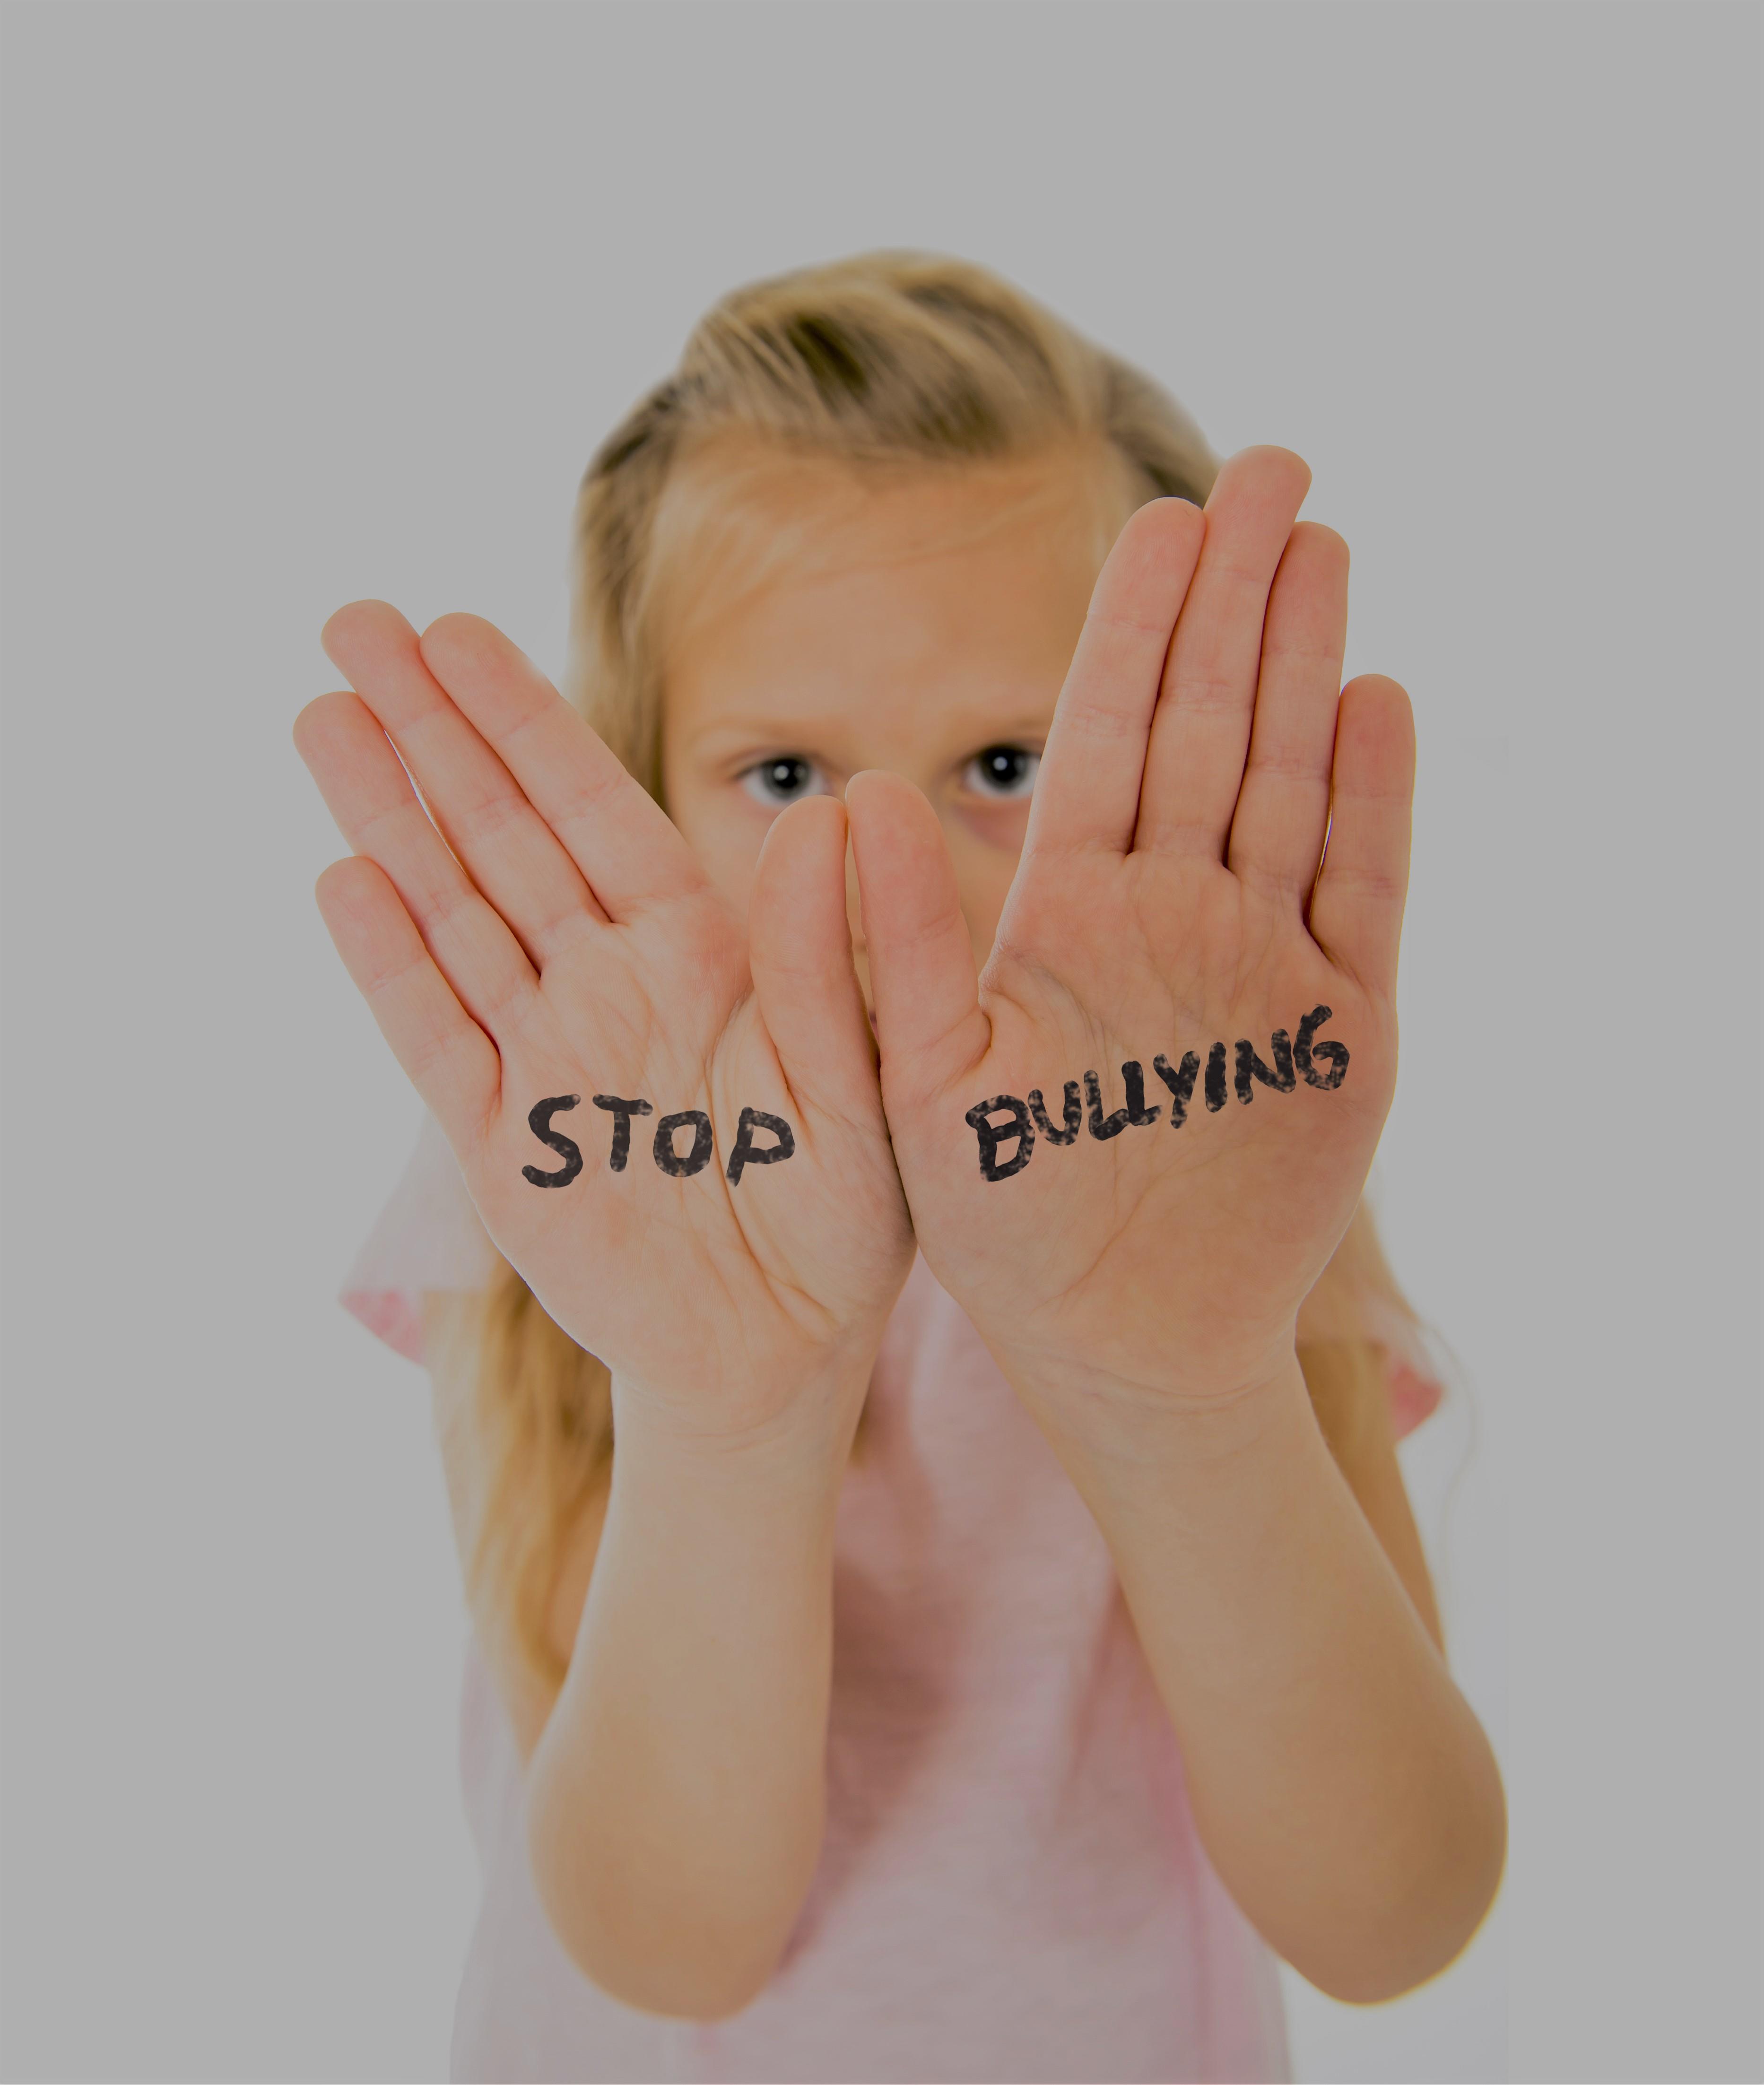 cyberbullying stop bullying posters